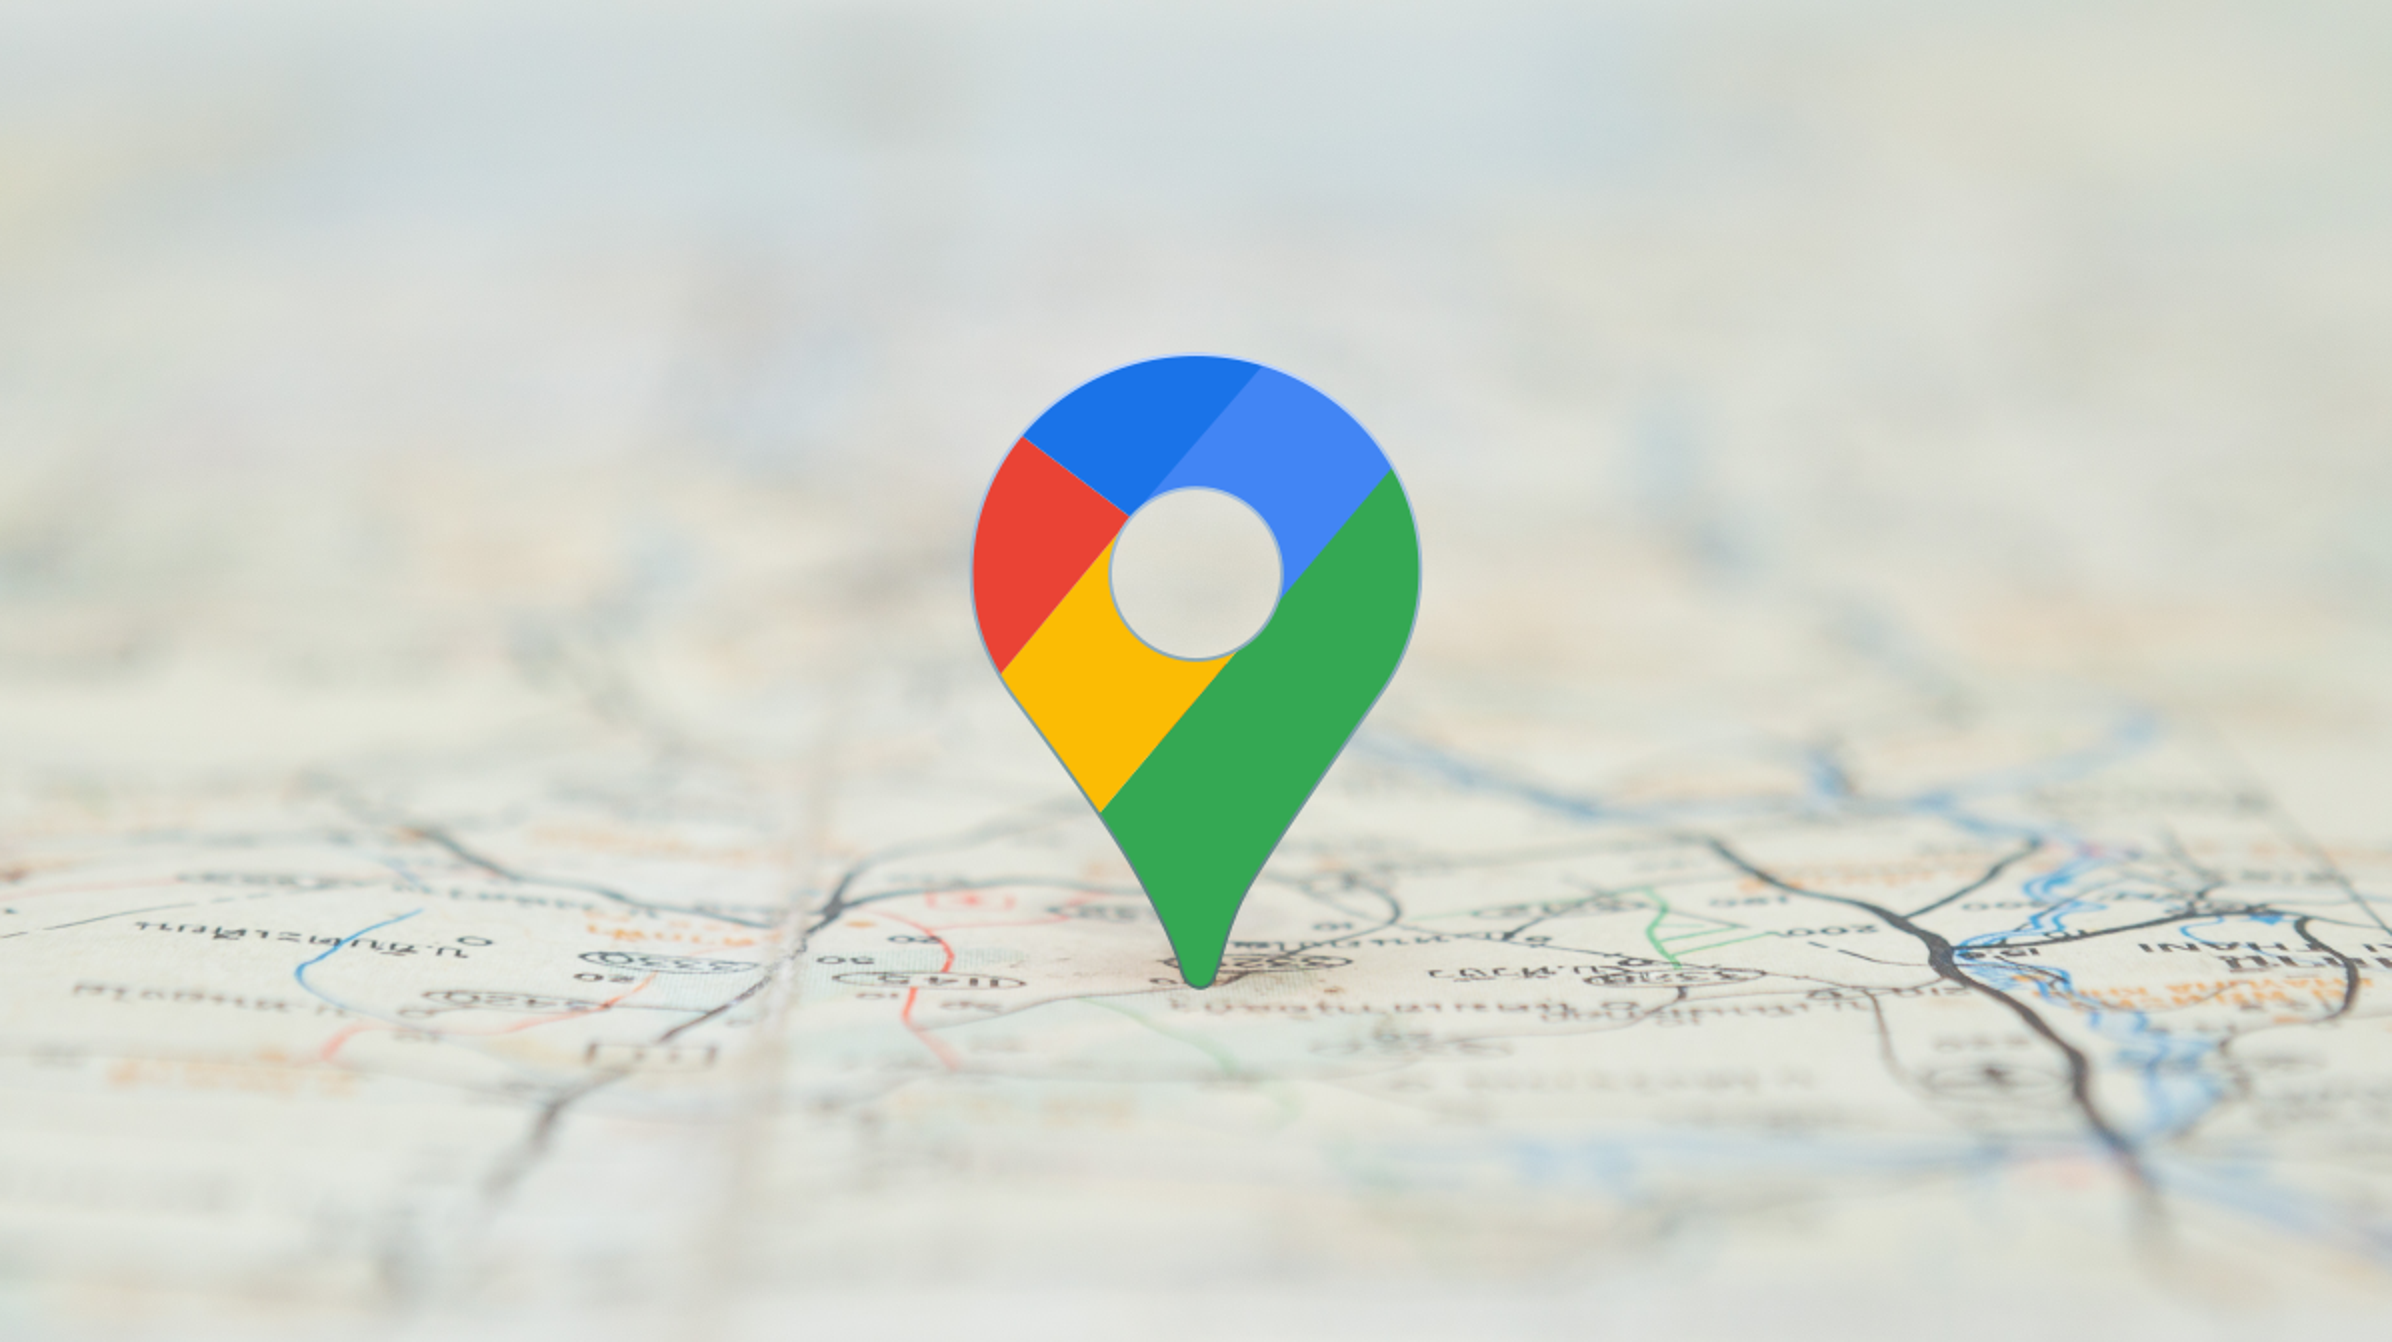 Looking for a New Navigation App? Here Are 5 Alternatives to Google Maps